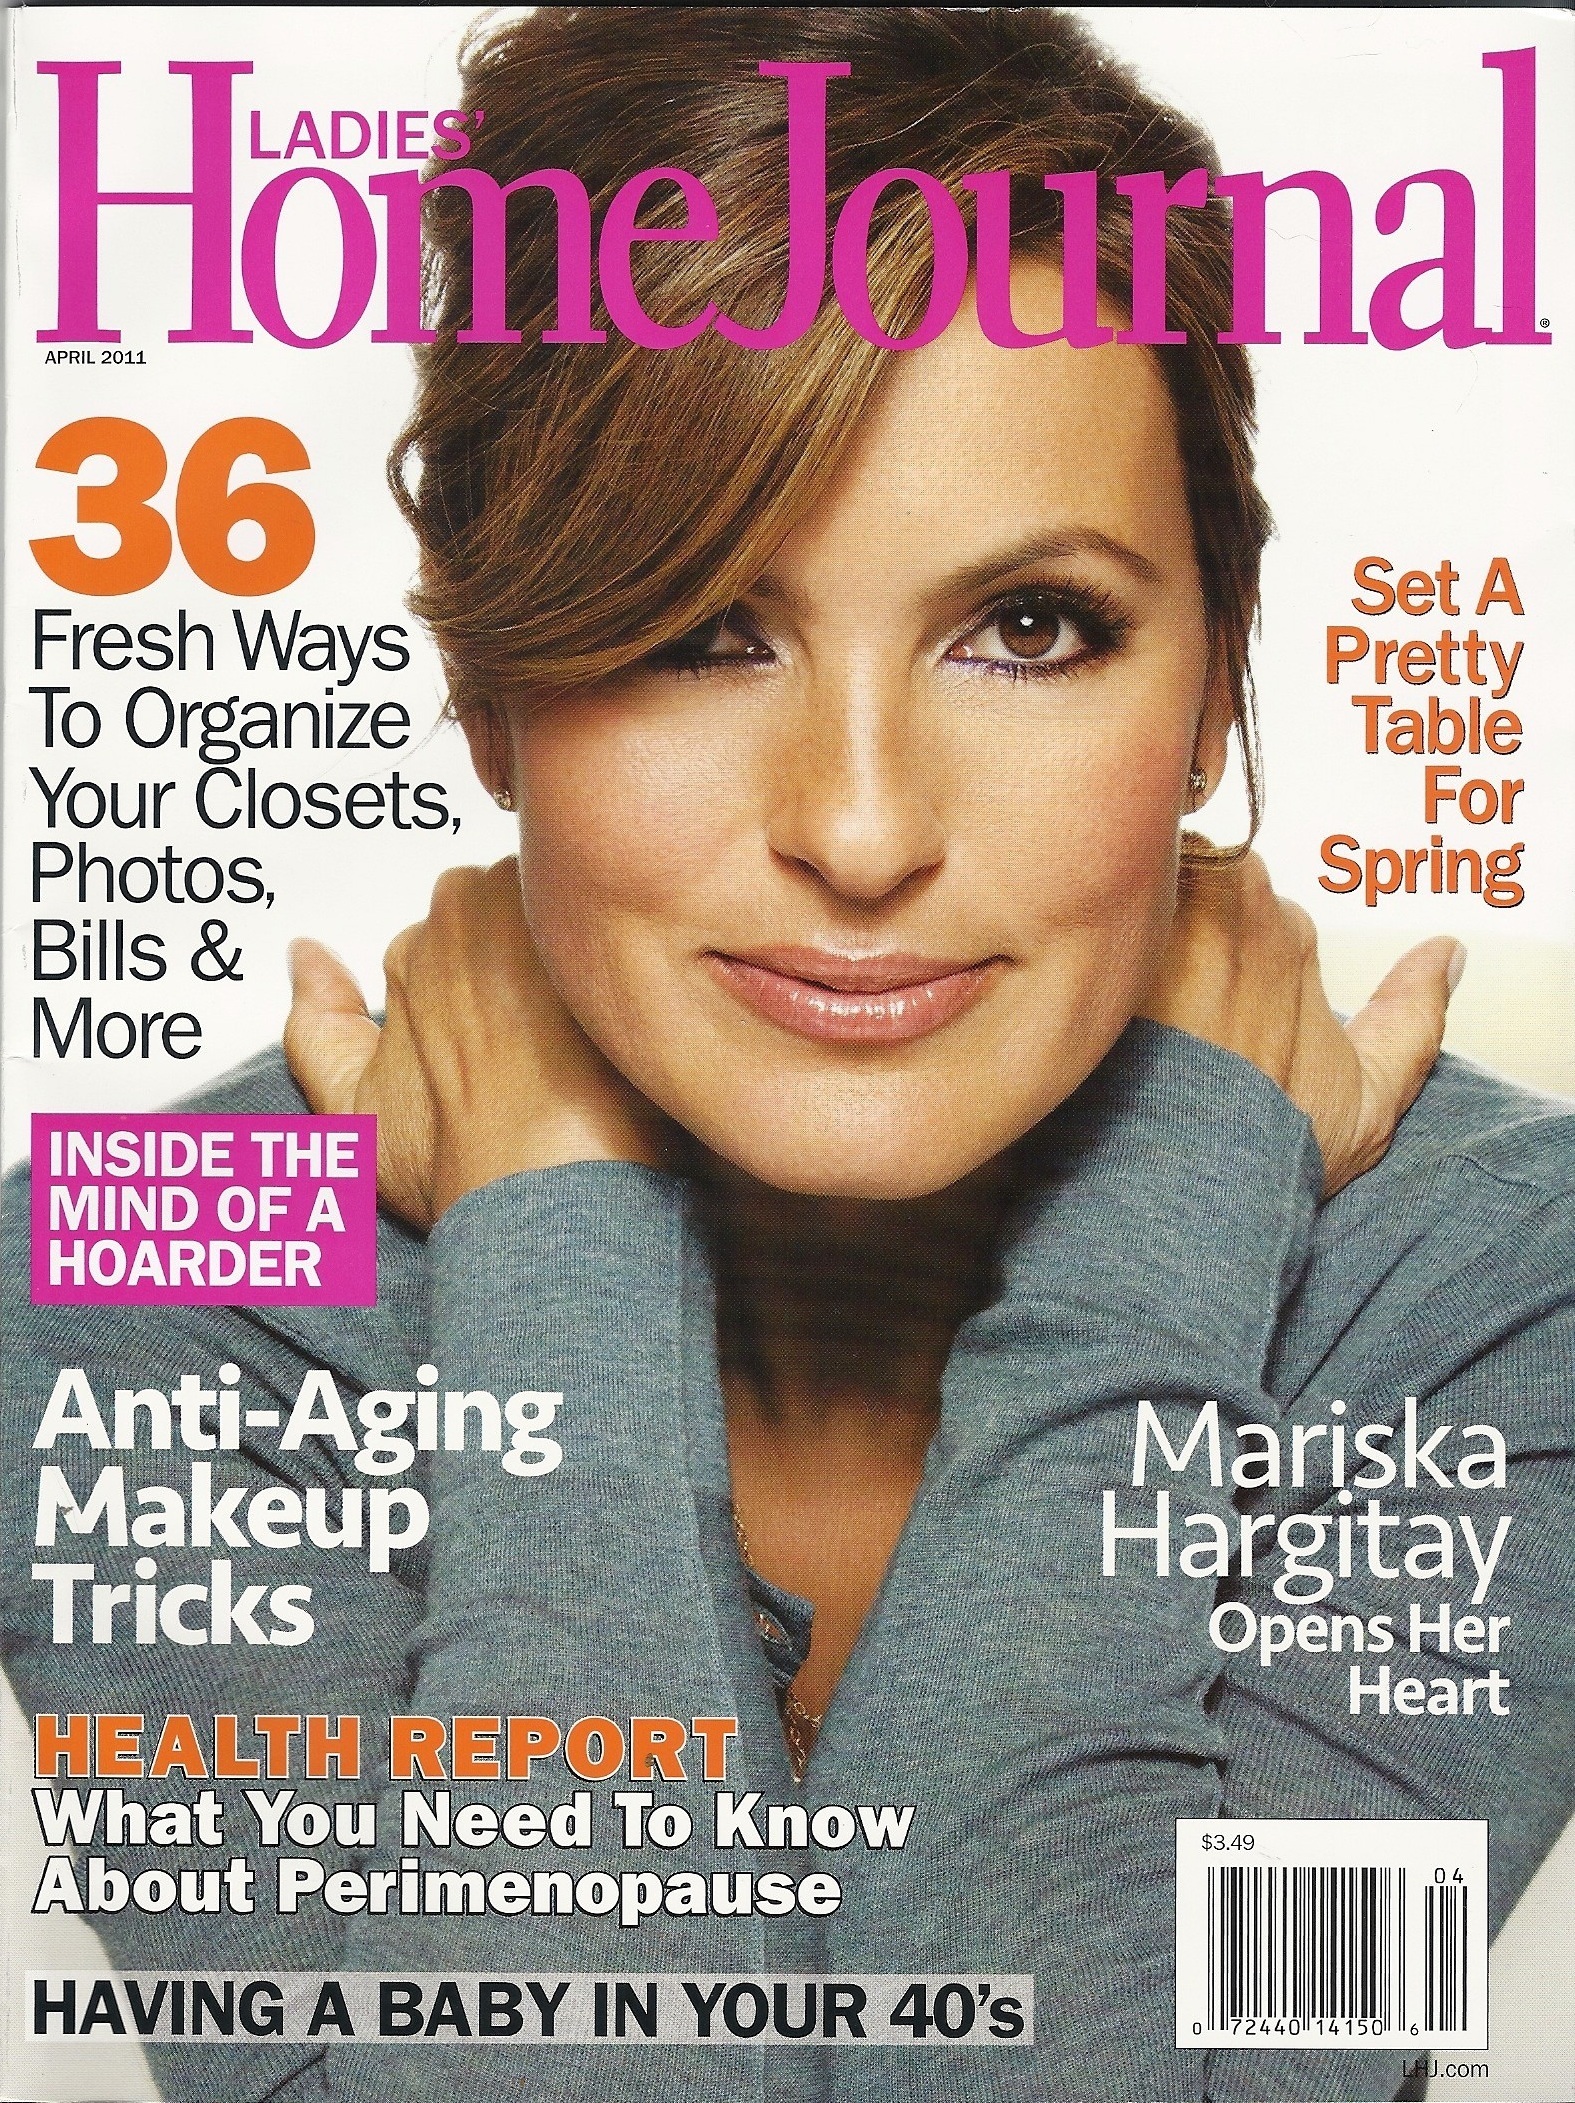 One Year Free Subscription to Ladies Home Journal